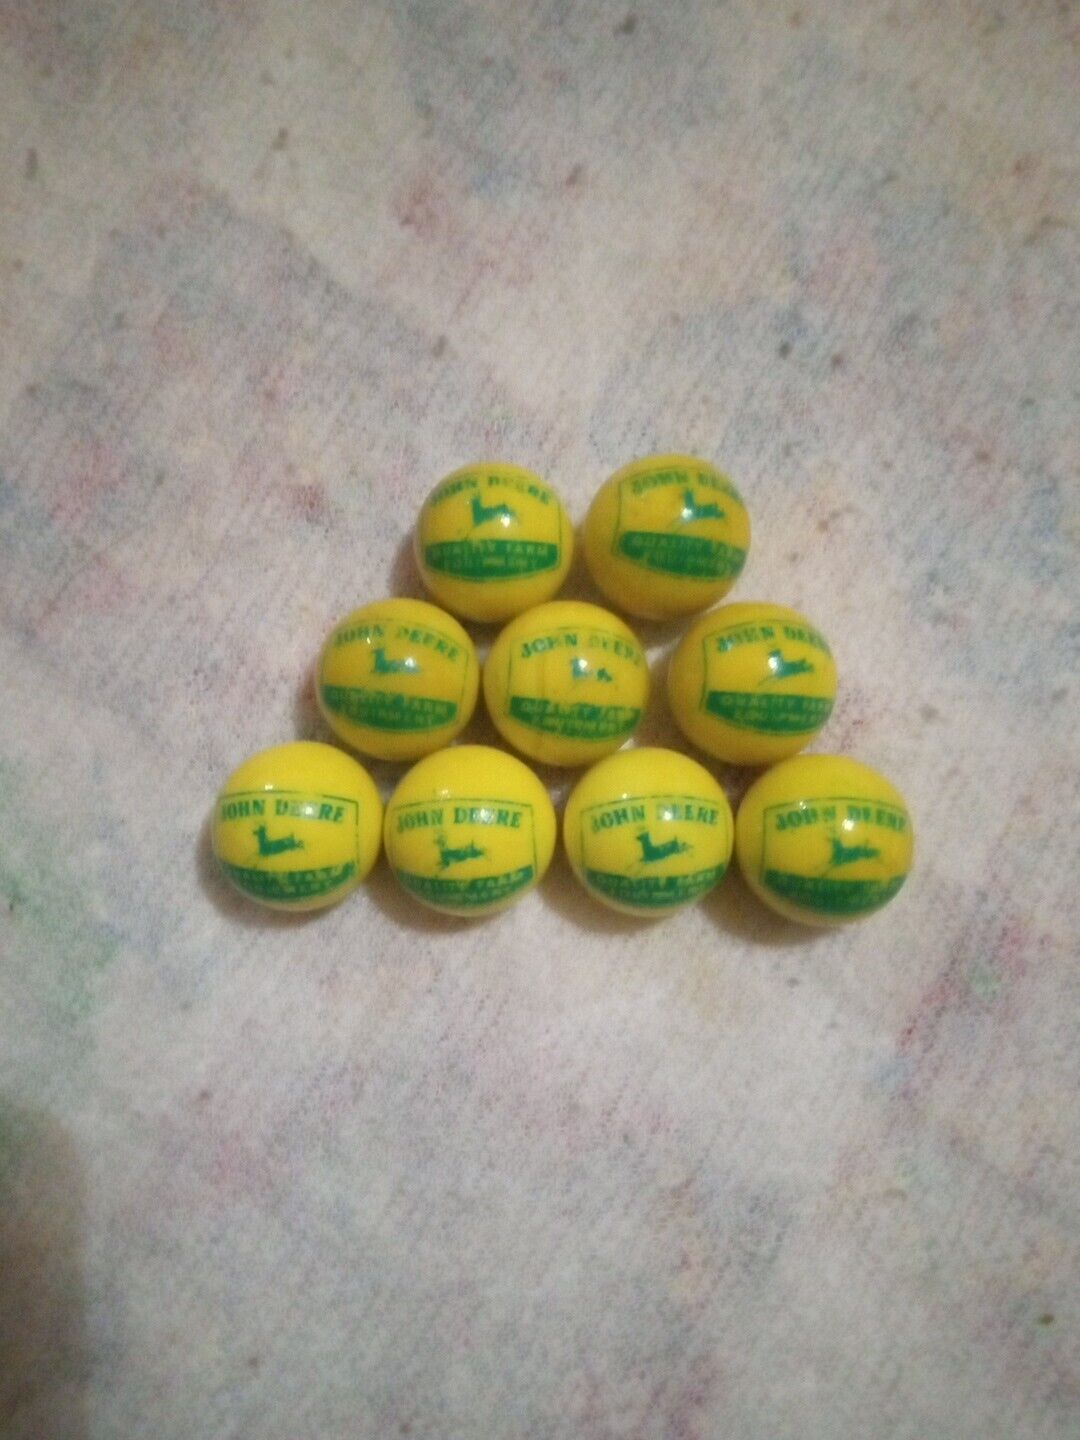 Vintage John Deere Marbles Lot Of 9 Extremely Unique Larger Size Very Nice Rare